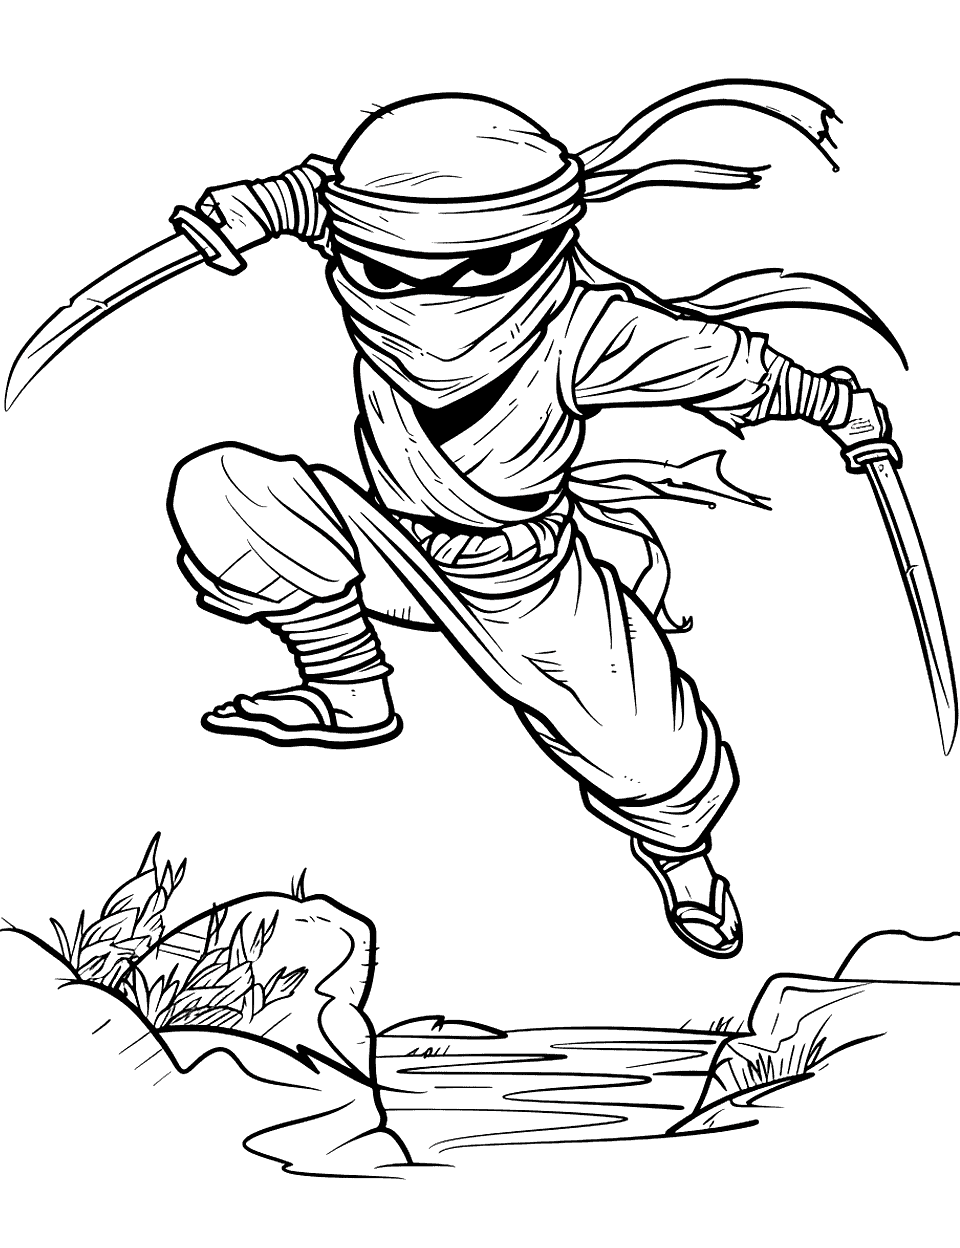 Ninja Warrior Leap Coloring Page - A ninja in mid-jump over a small stream.